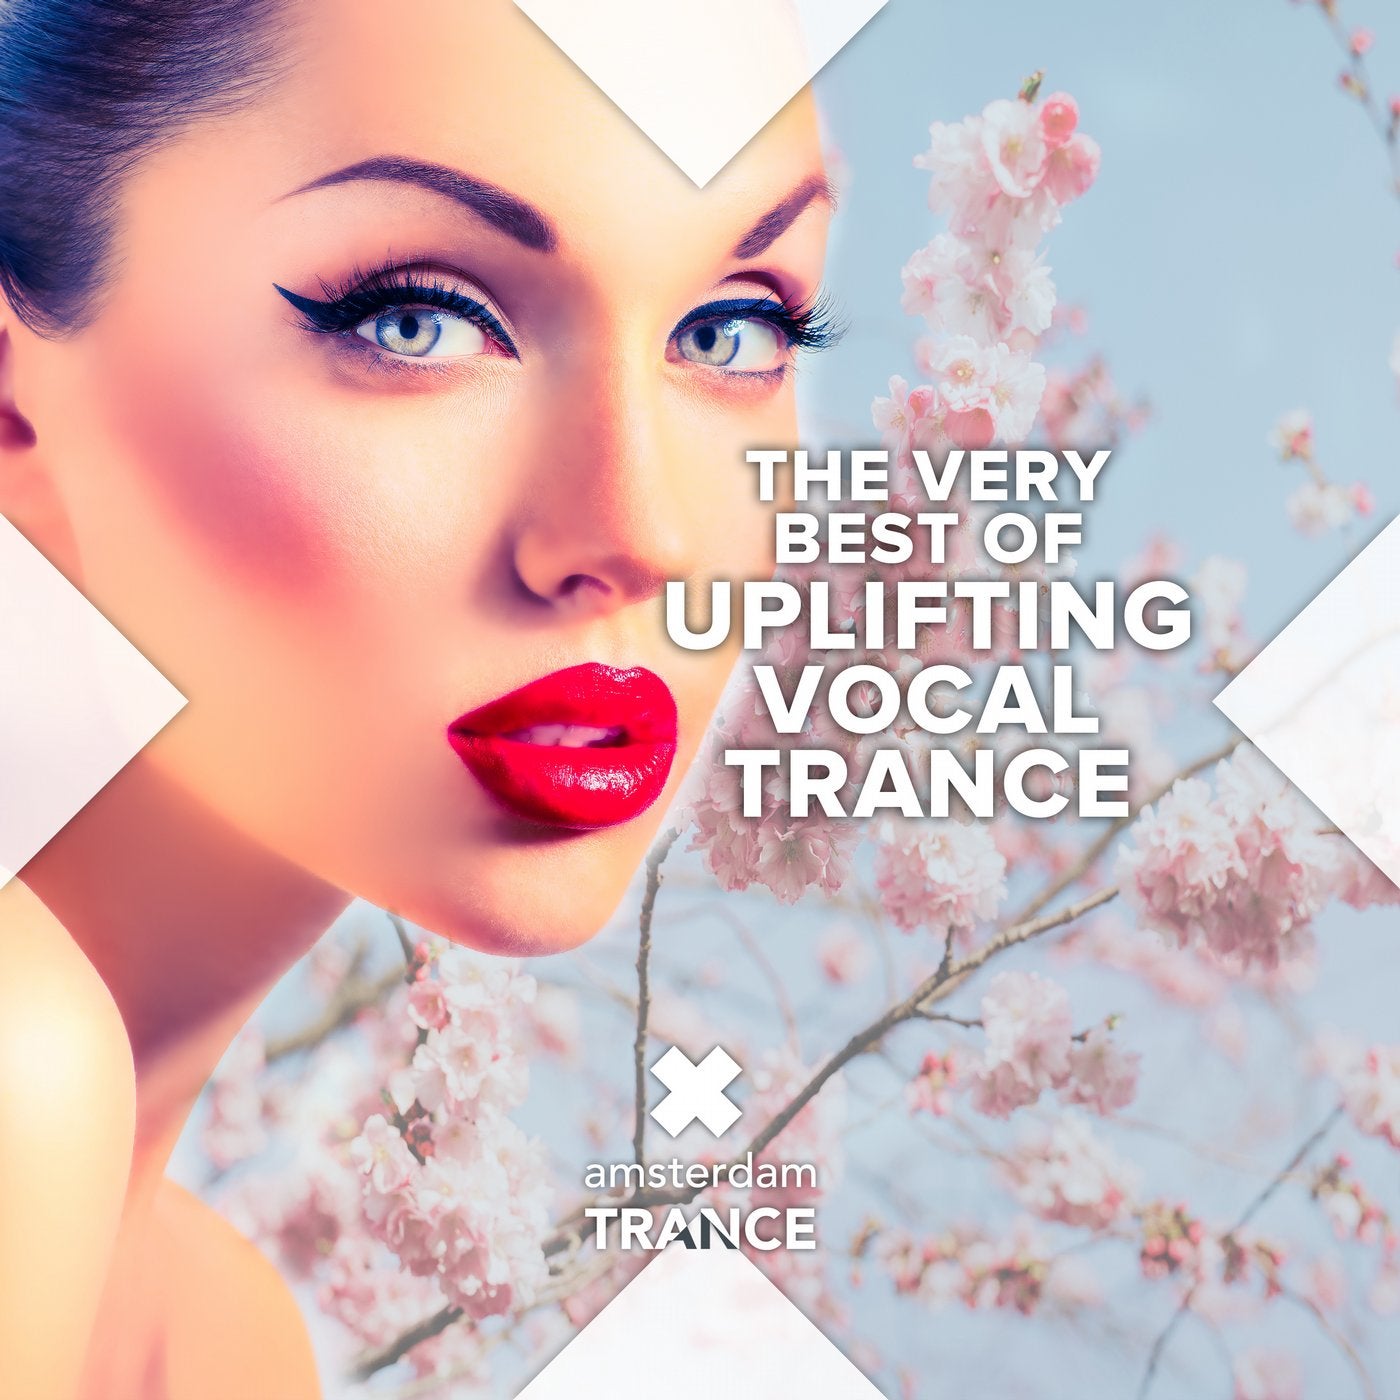 The Very Best of Uplifting Vocal Trance